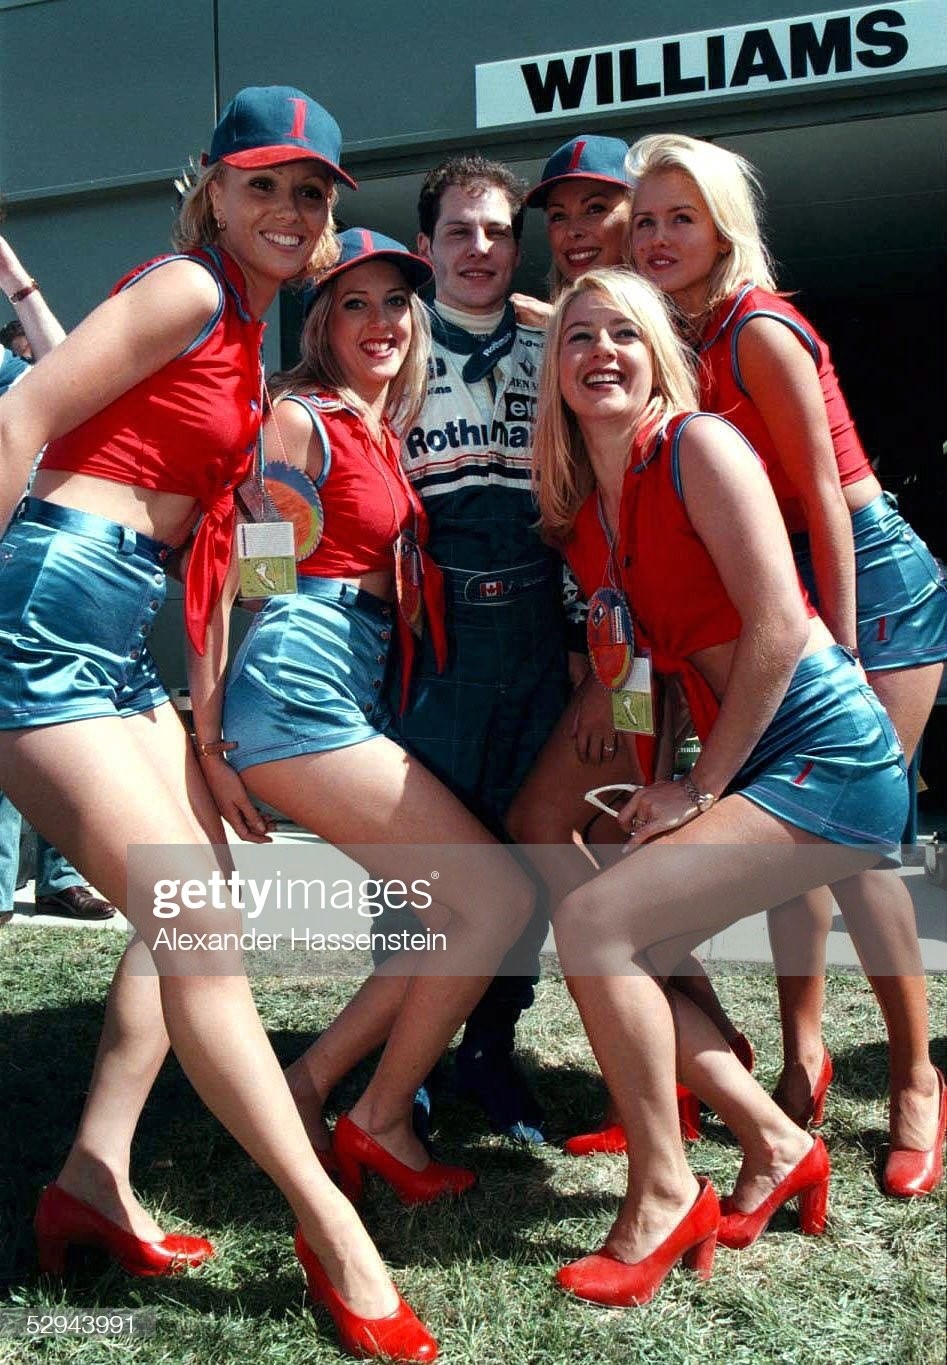 Jacques Villeneuve, Williams, with girls at the Australian GP in Melbourne, on March 07, 1996. 